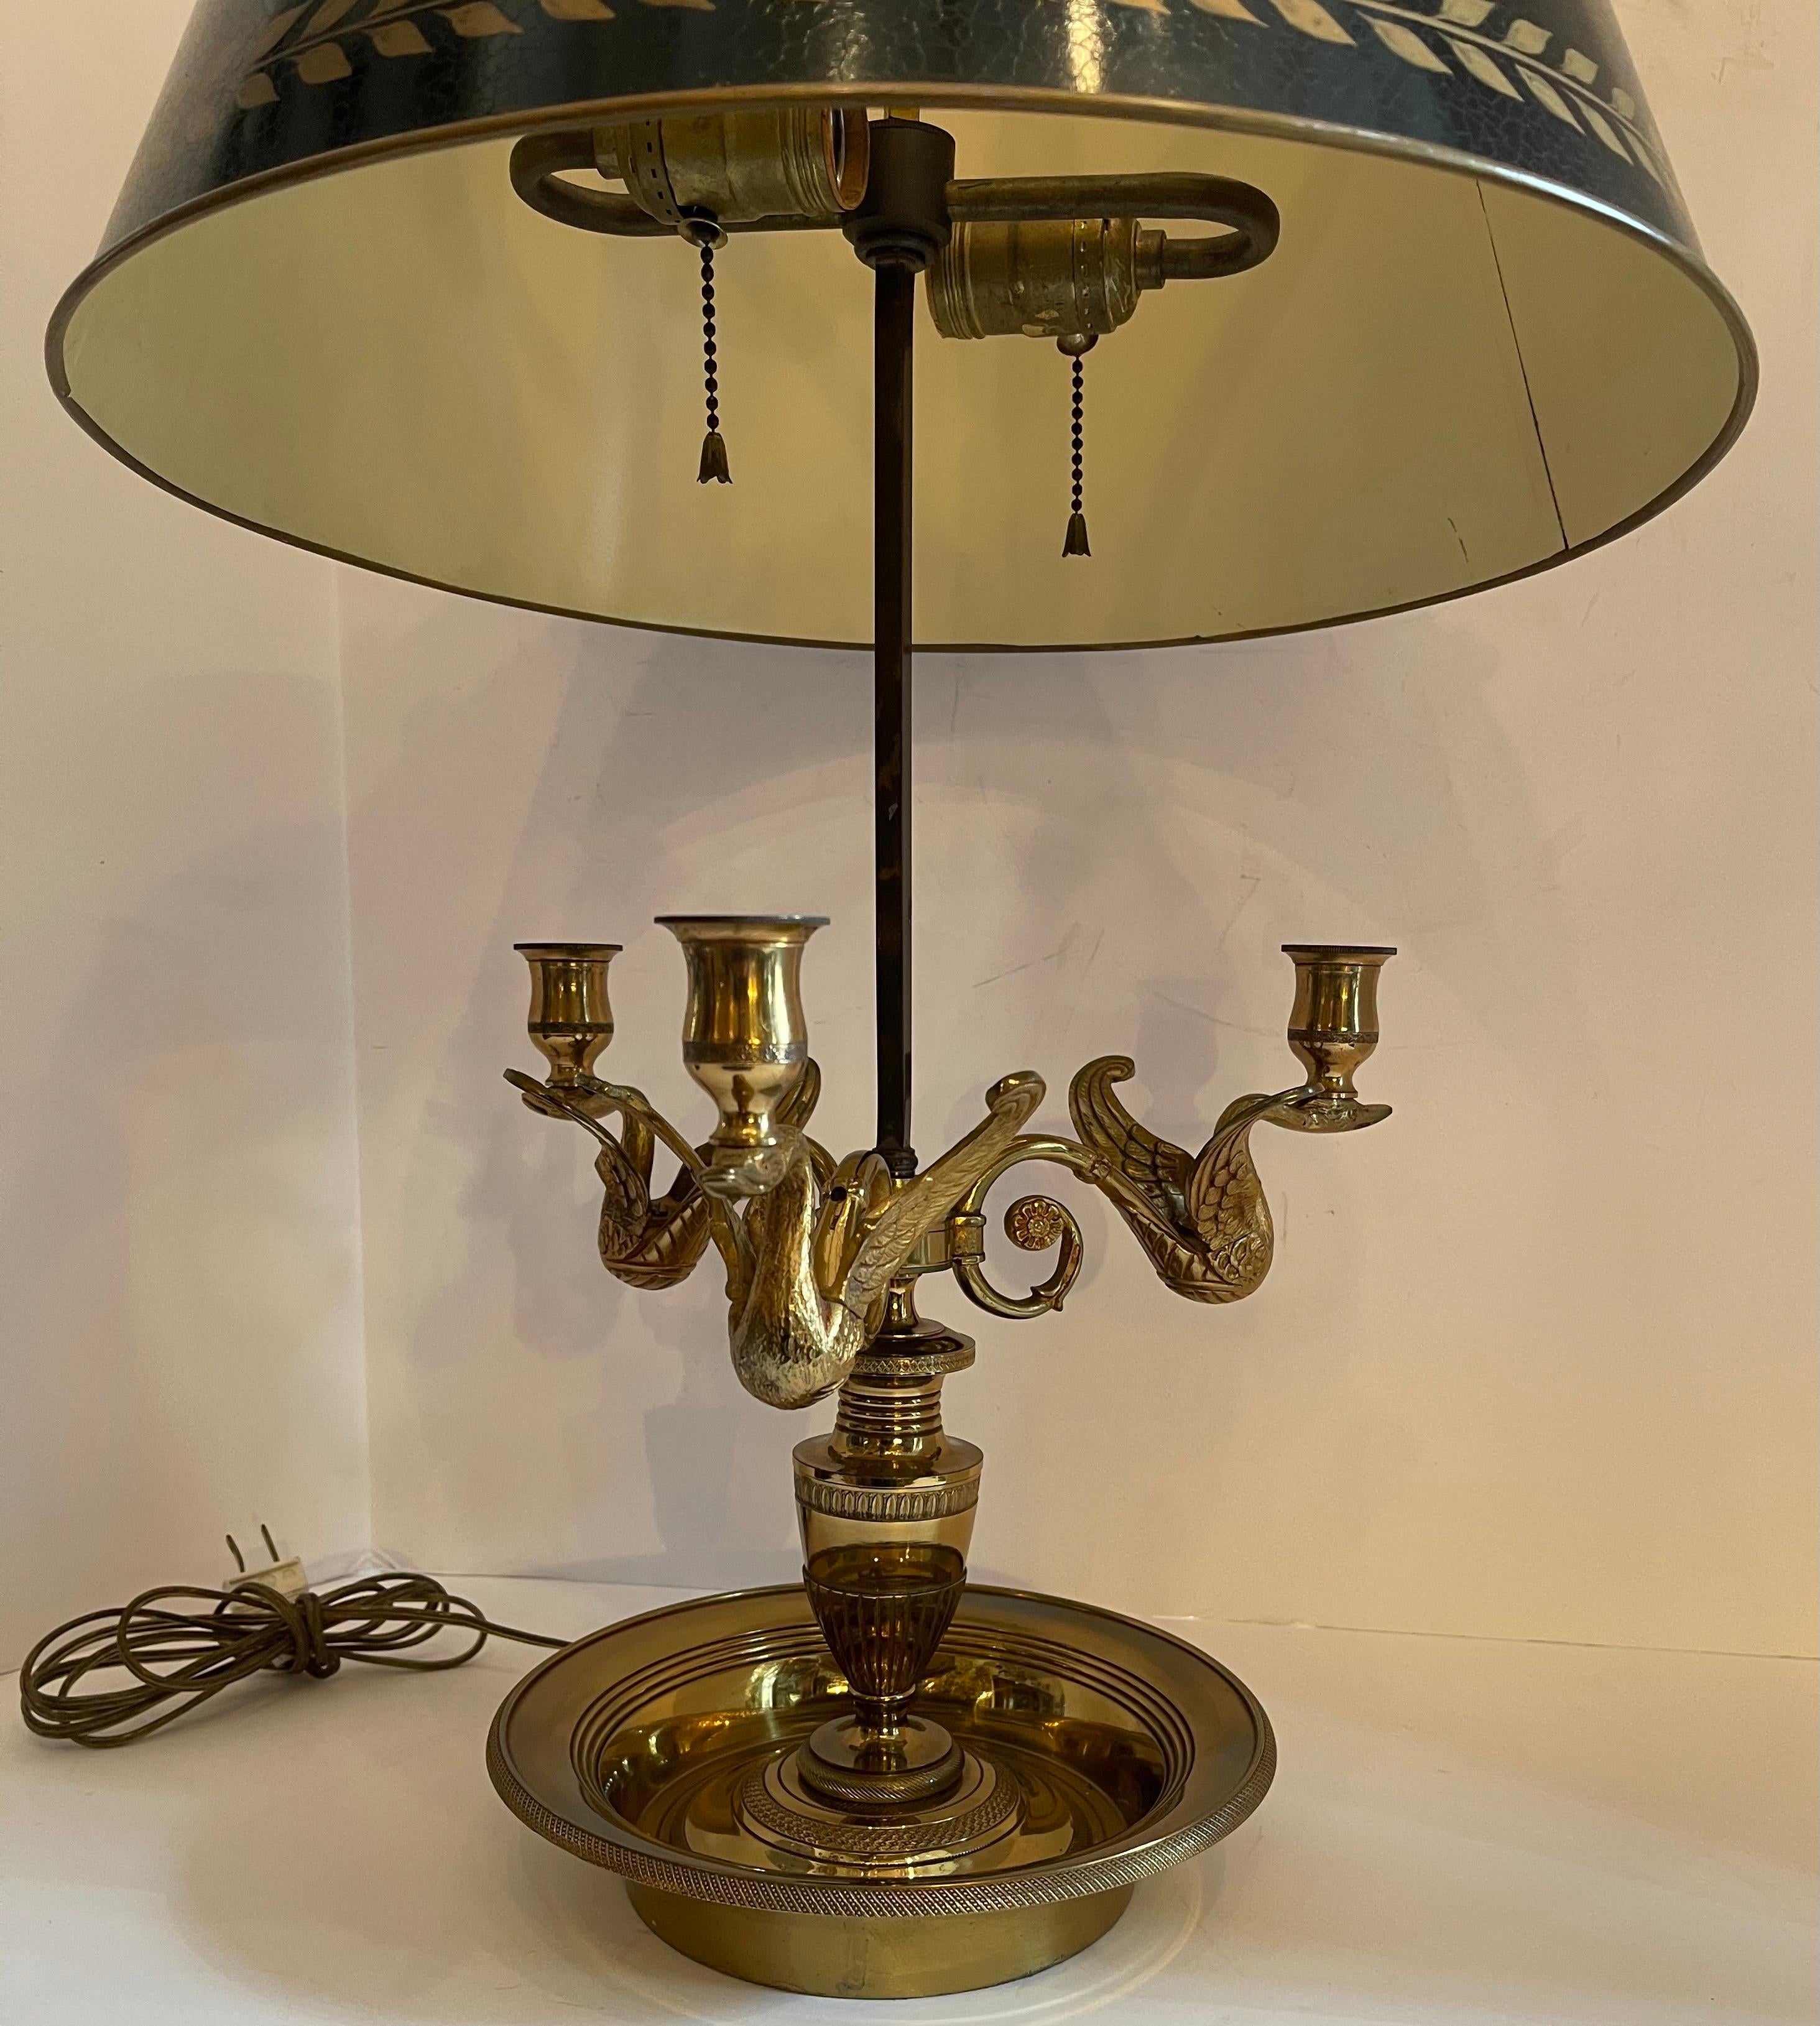 Wonderful French Louis XVI Gilt Bronze Three-Arm Swan Bouillotte Lamp Tole Shade In Good Condition For Sale In Roslyn, NY